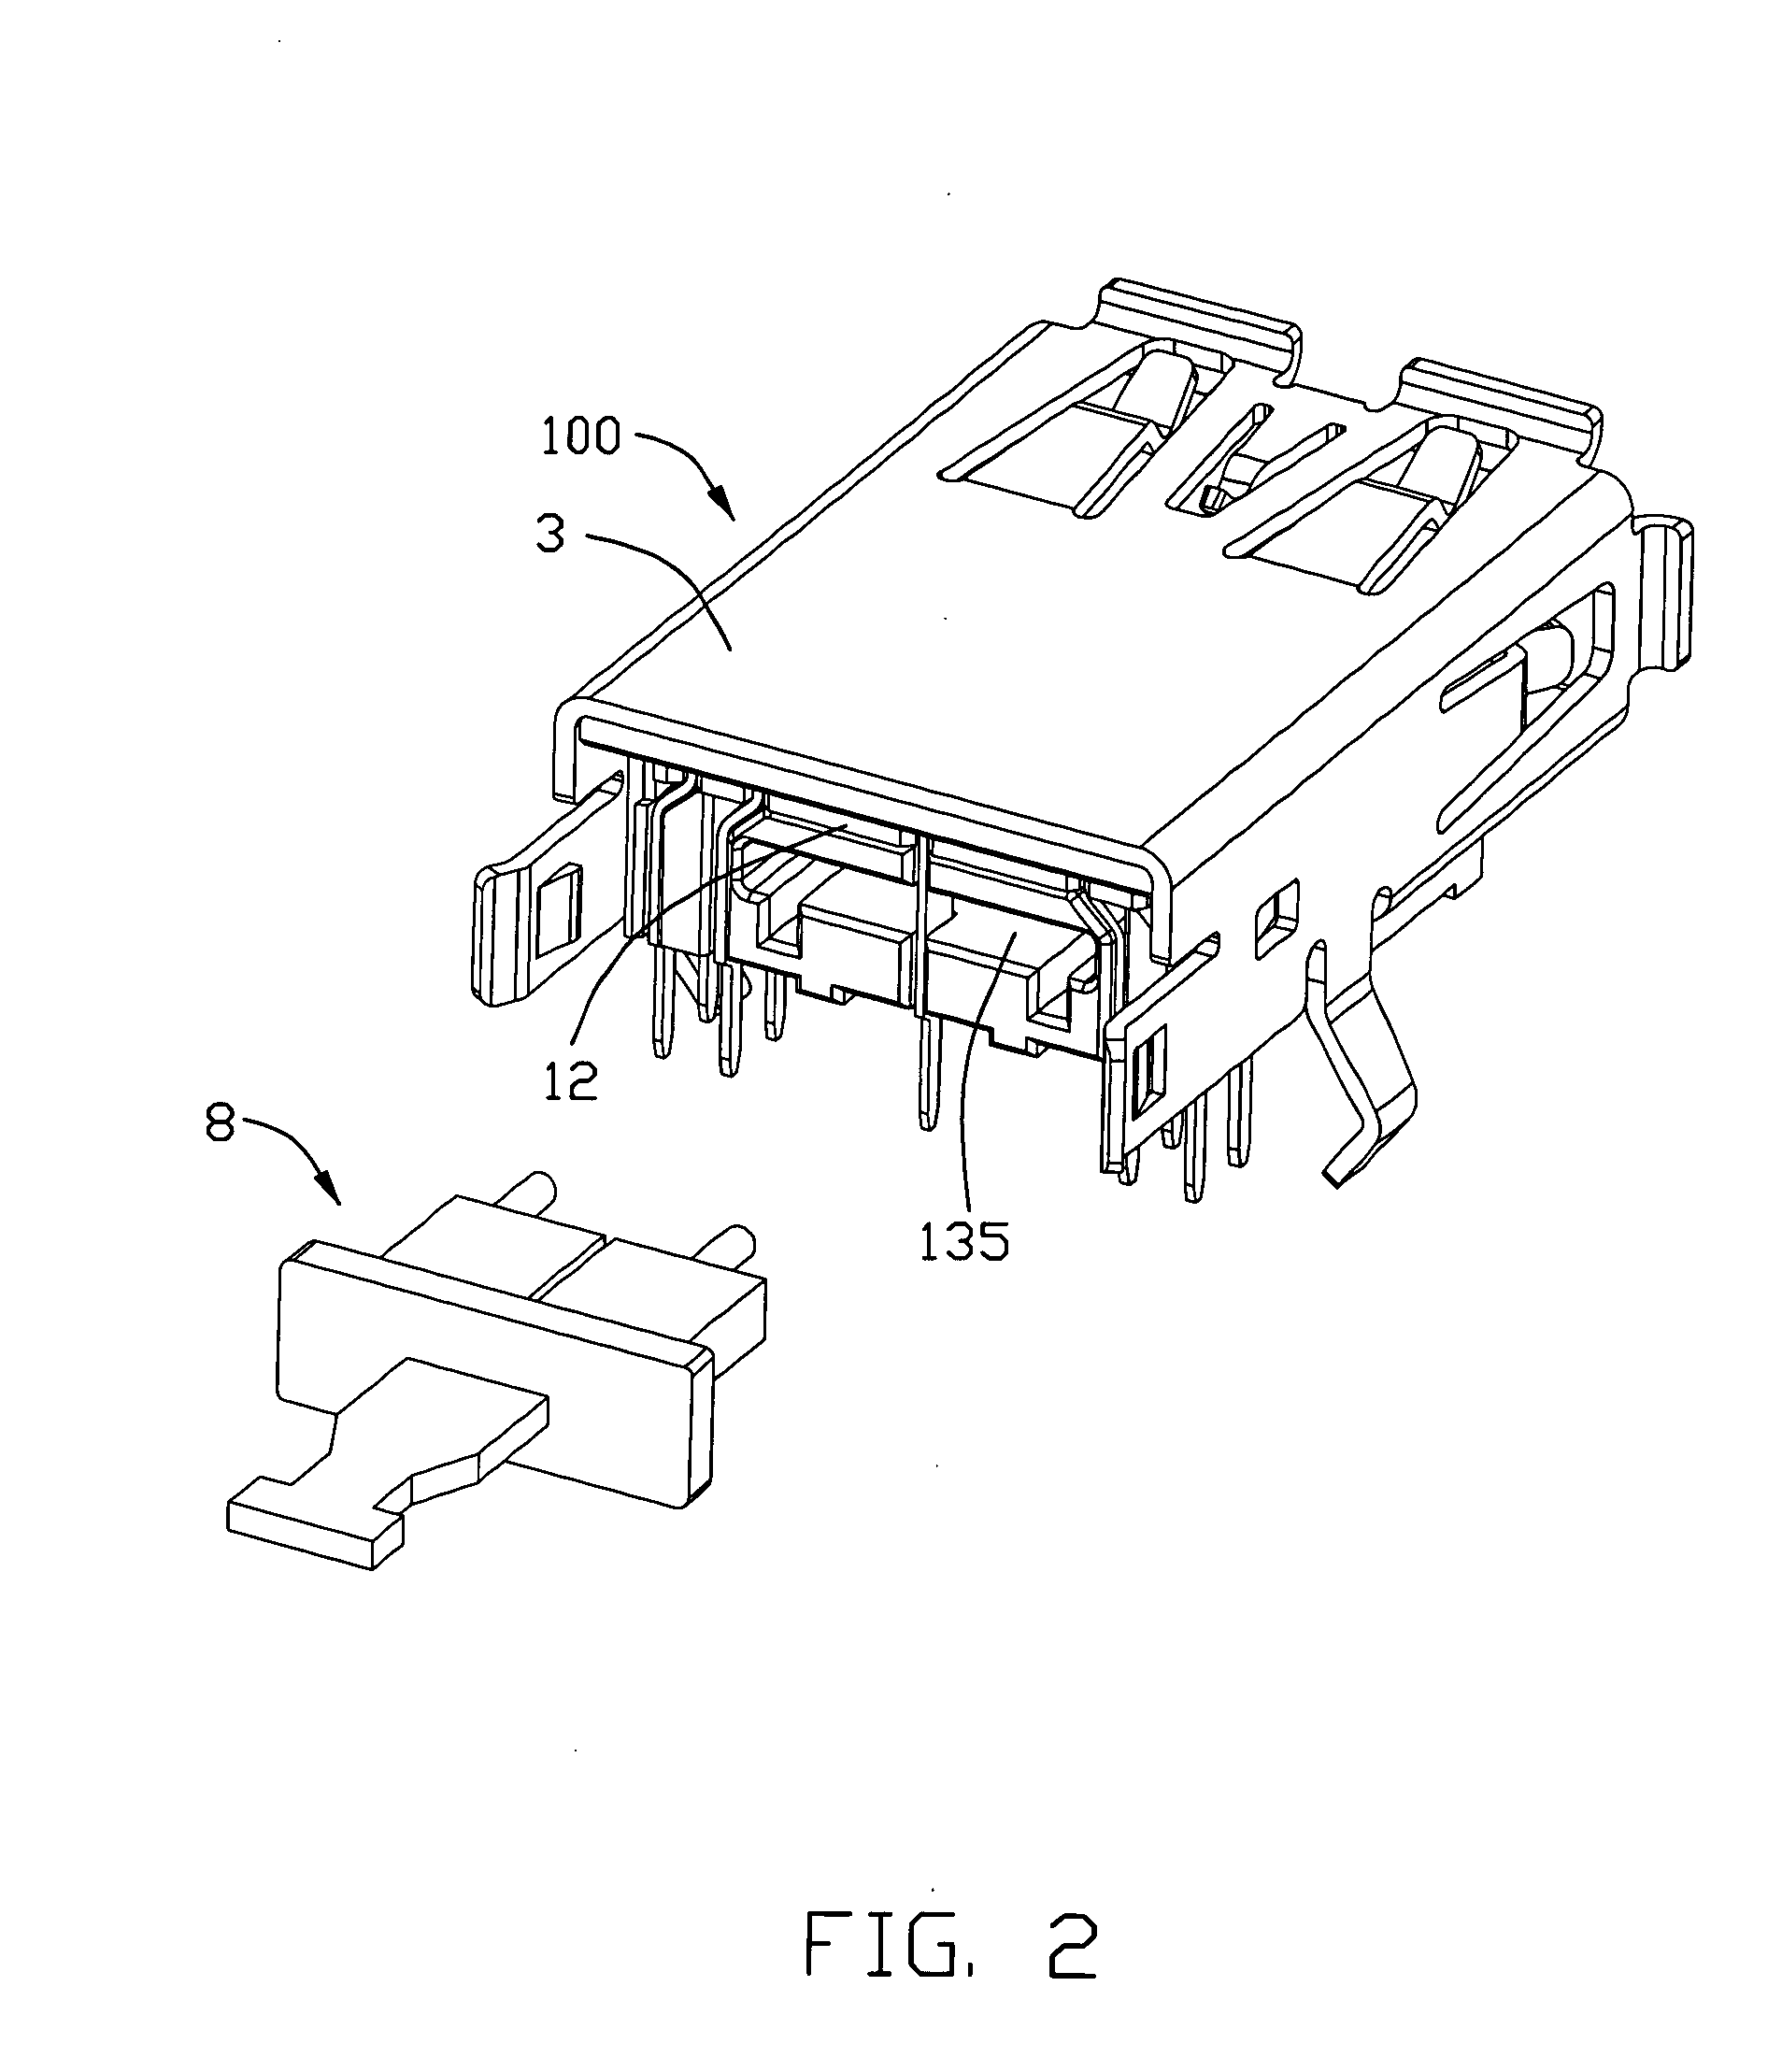 Electrical connector with improved contact footprints